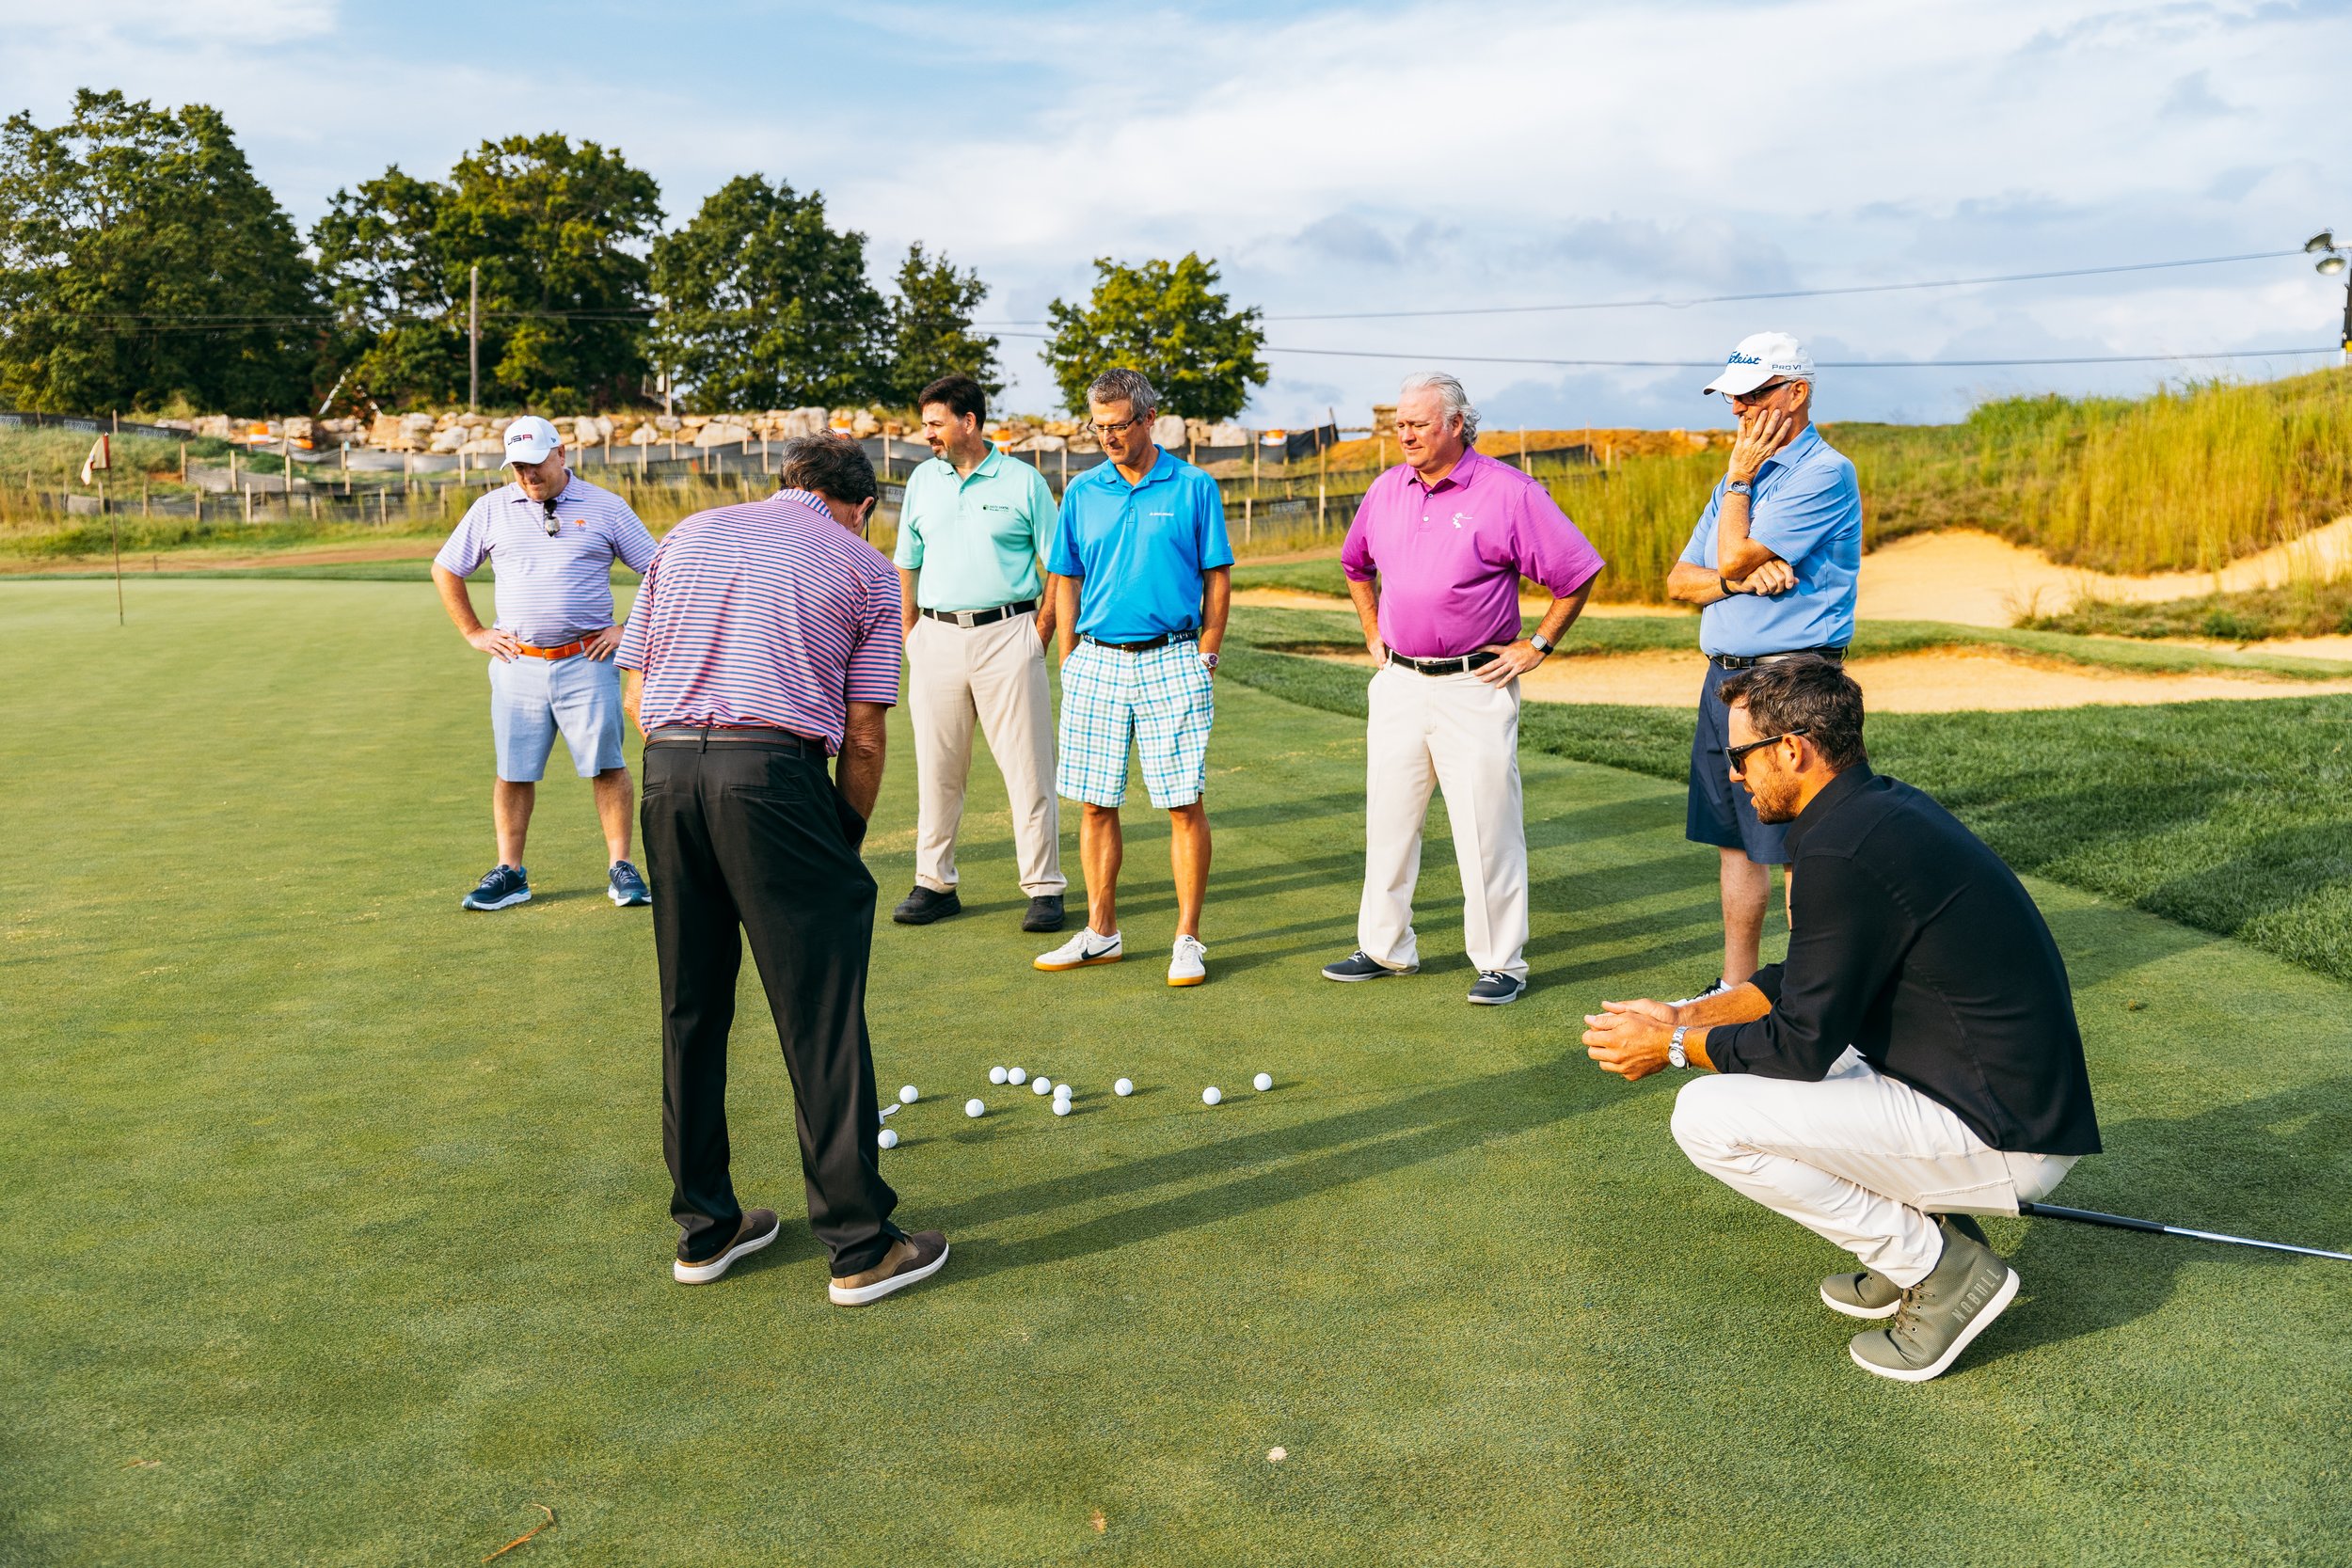 A group of golfers standing on the green.